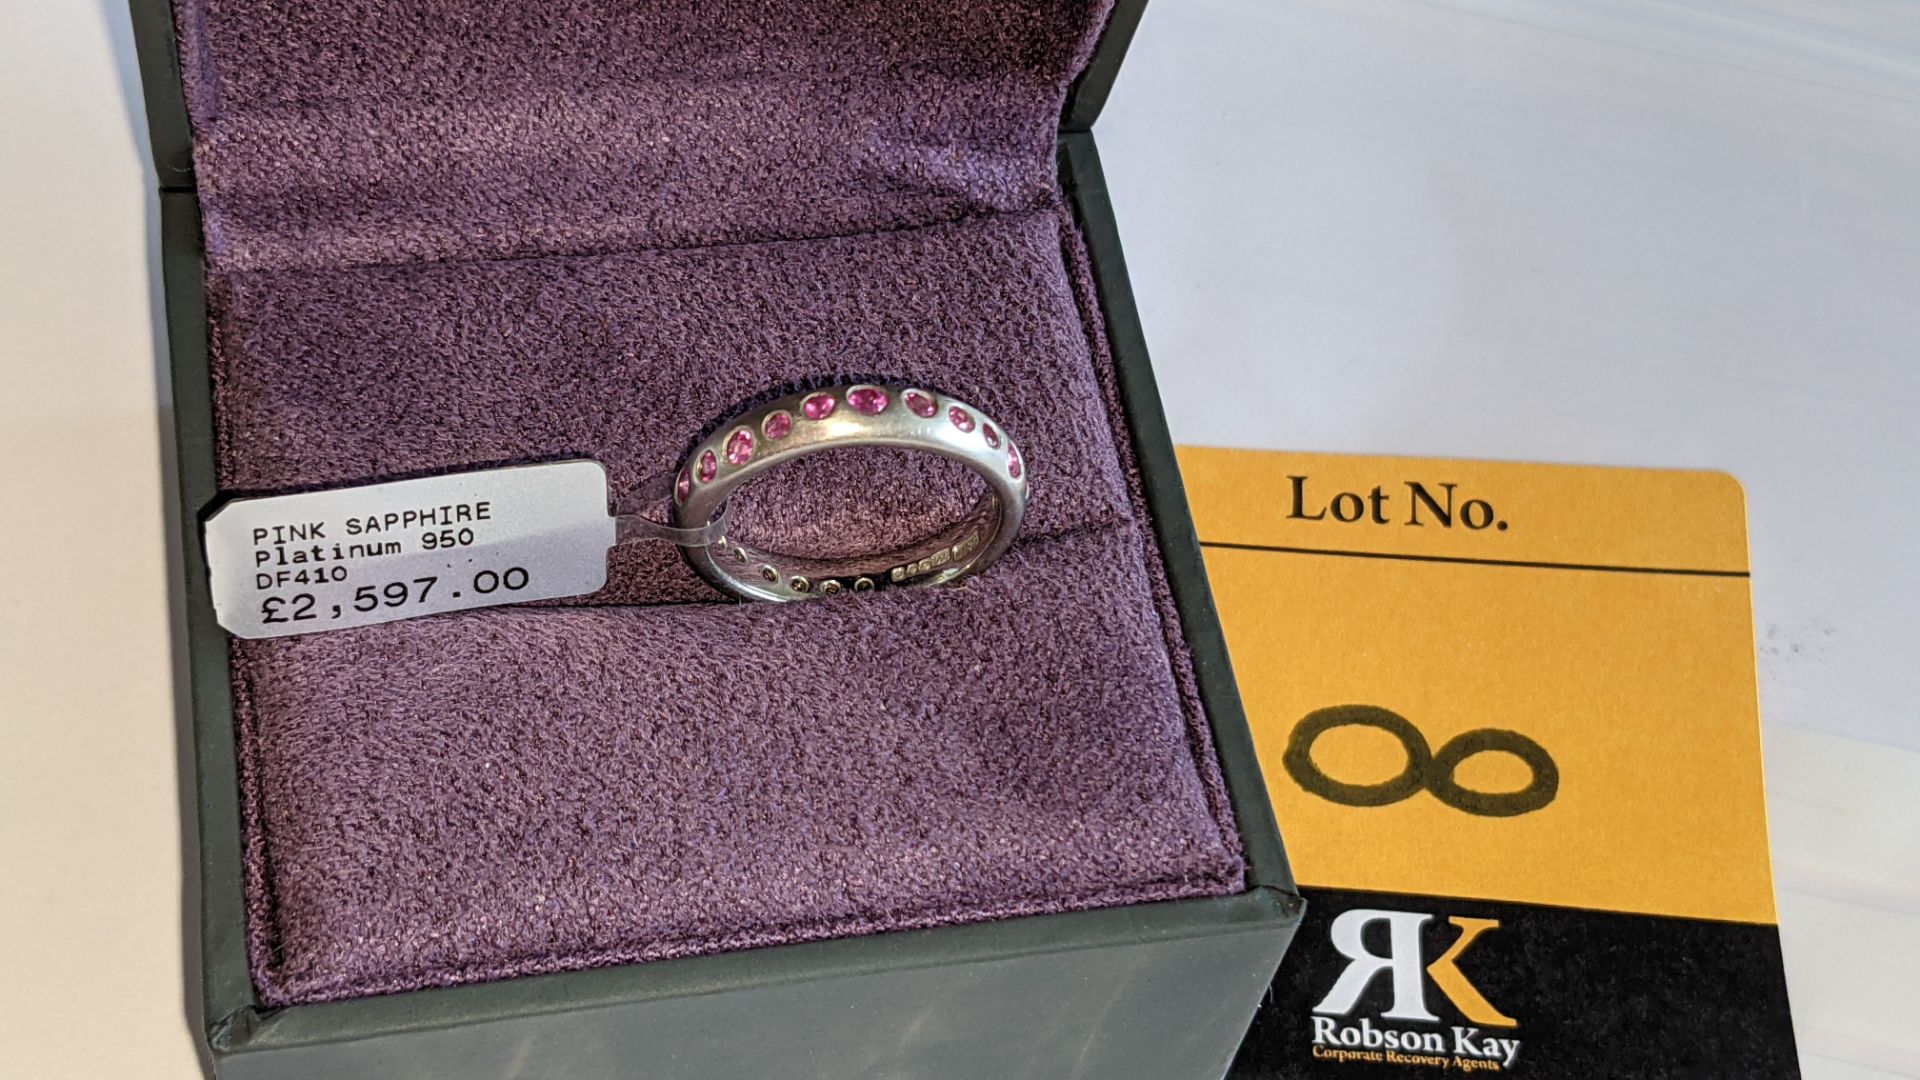 Platinum 950 & 0.6ct pink sapphire ring RRP £2,597 - Image 4 of 15